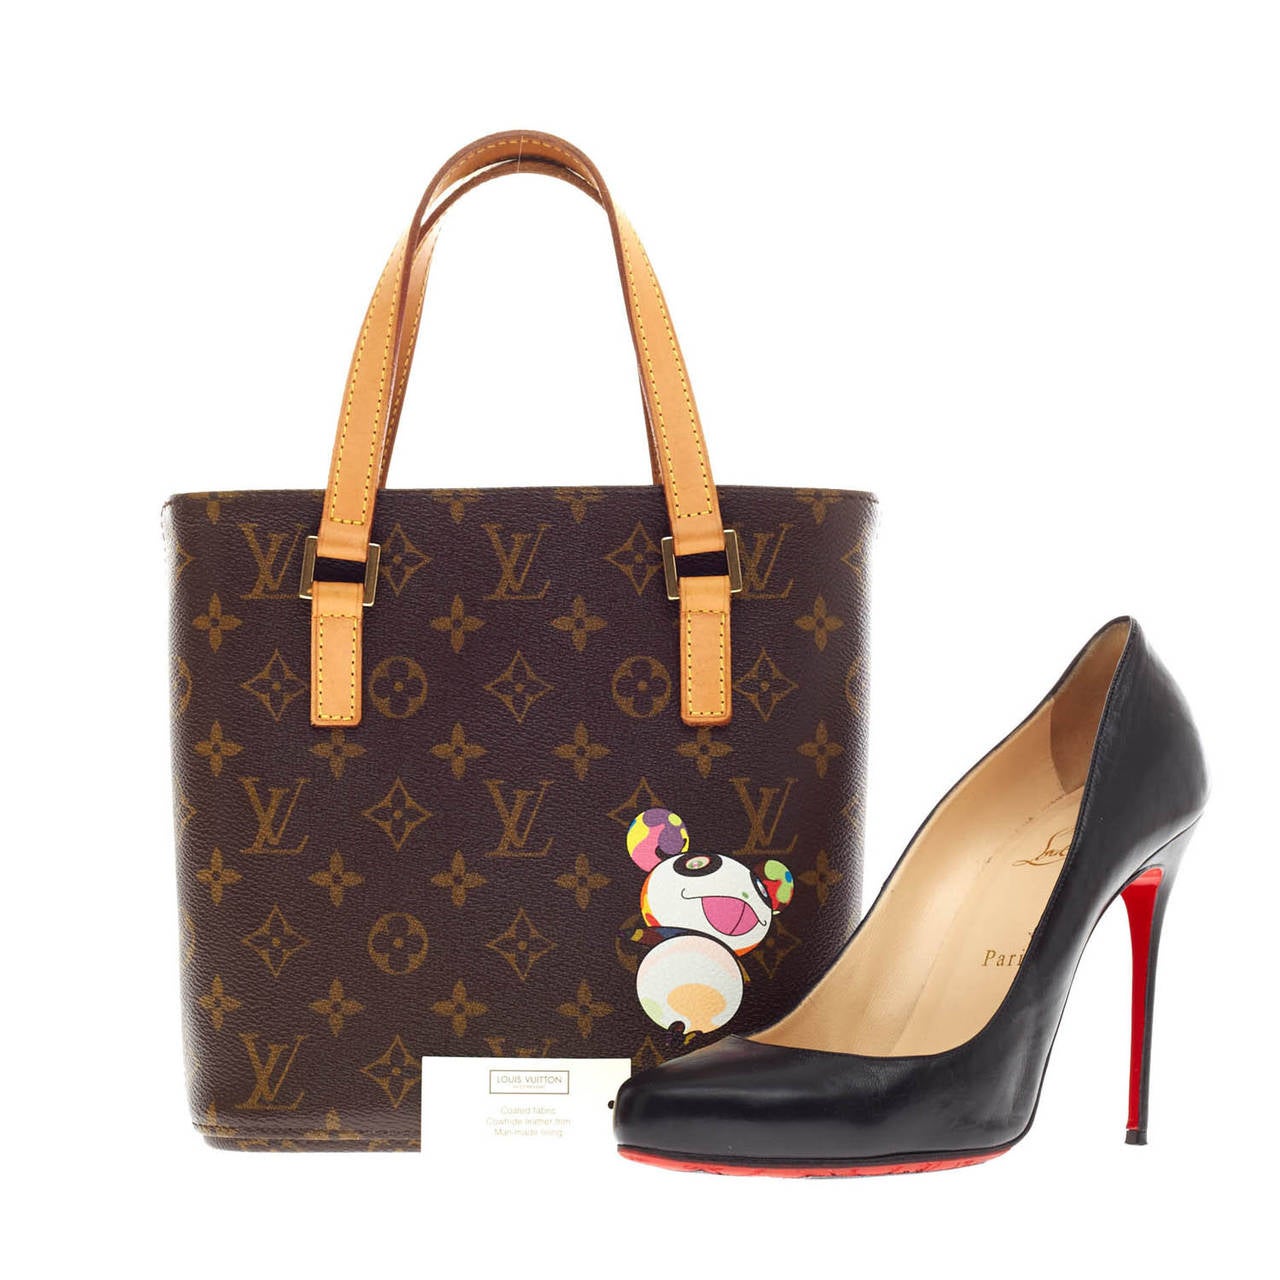 This authentic limited edition Louis Vuitton Vavin Monogram Canvas with Panda in size PM is an adorably modern update on the classic mini tote. Released by artist Takashi Murakami in 2003, this bag features Louis Vuitton's iconic monogram print